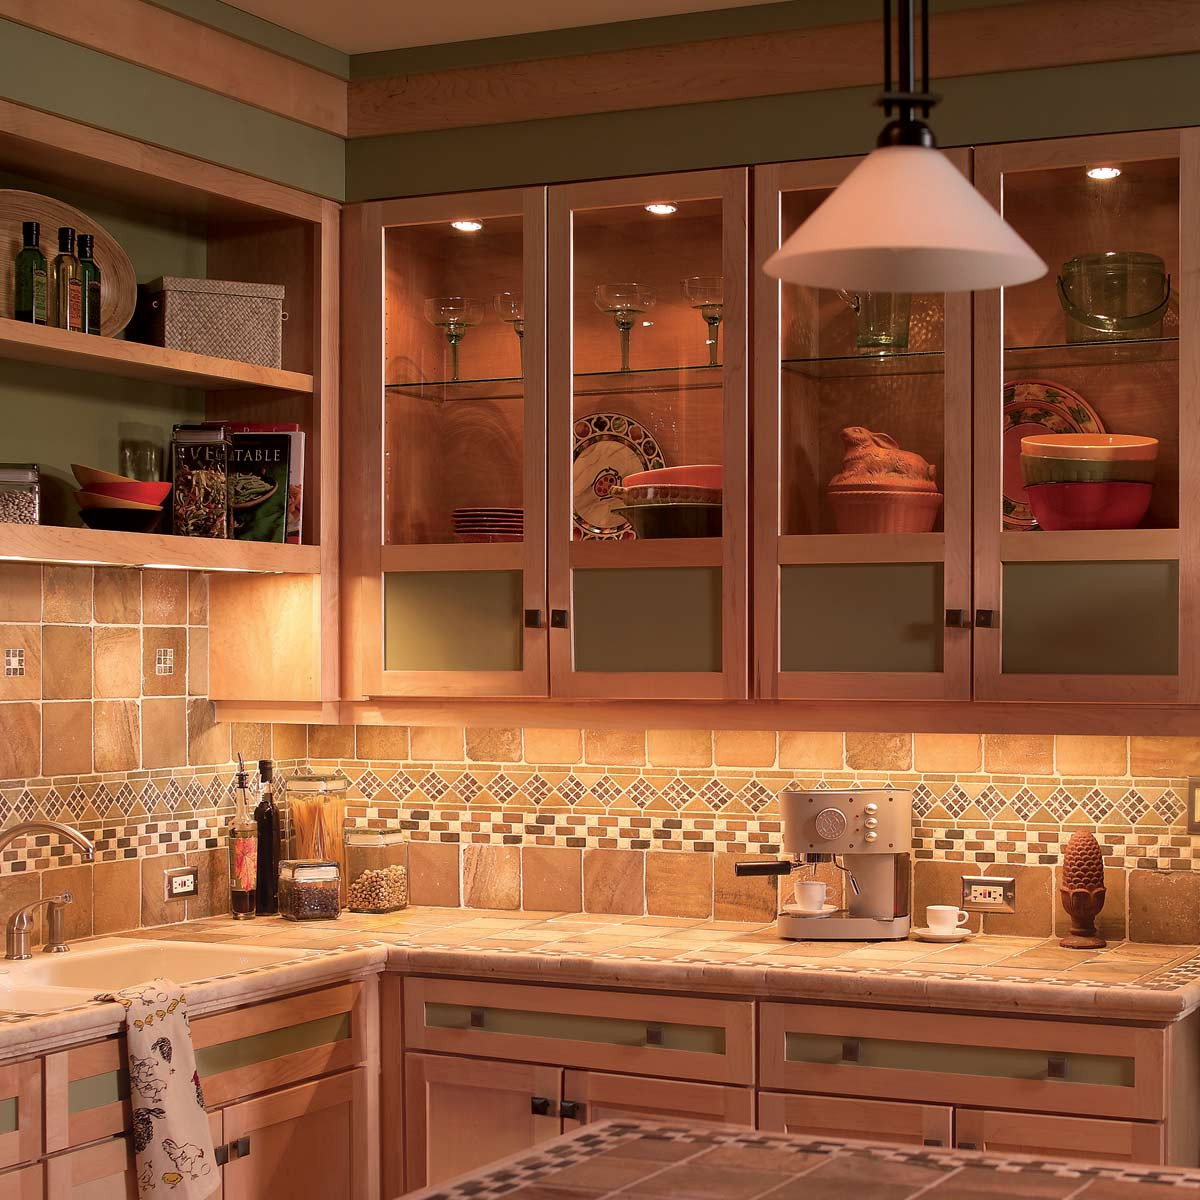 Under Cabinet Kitchen Lighting Options
 How to Install Under Cabinet Lighting in Your Kitchen